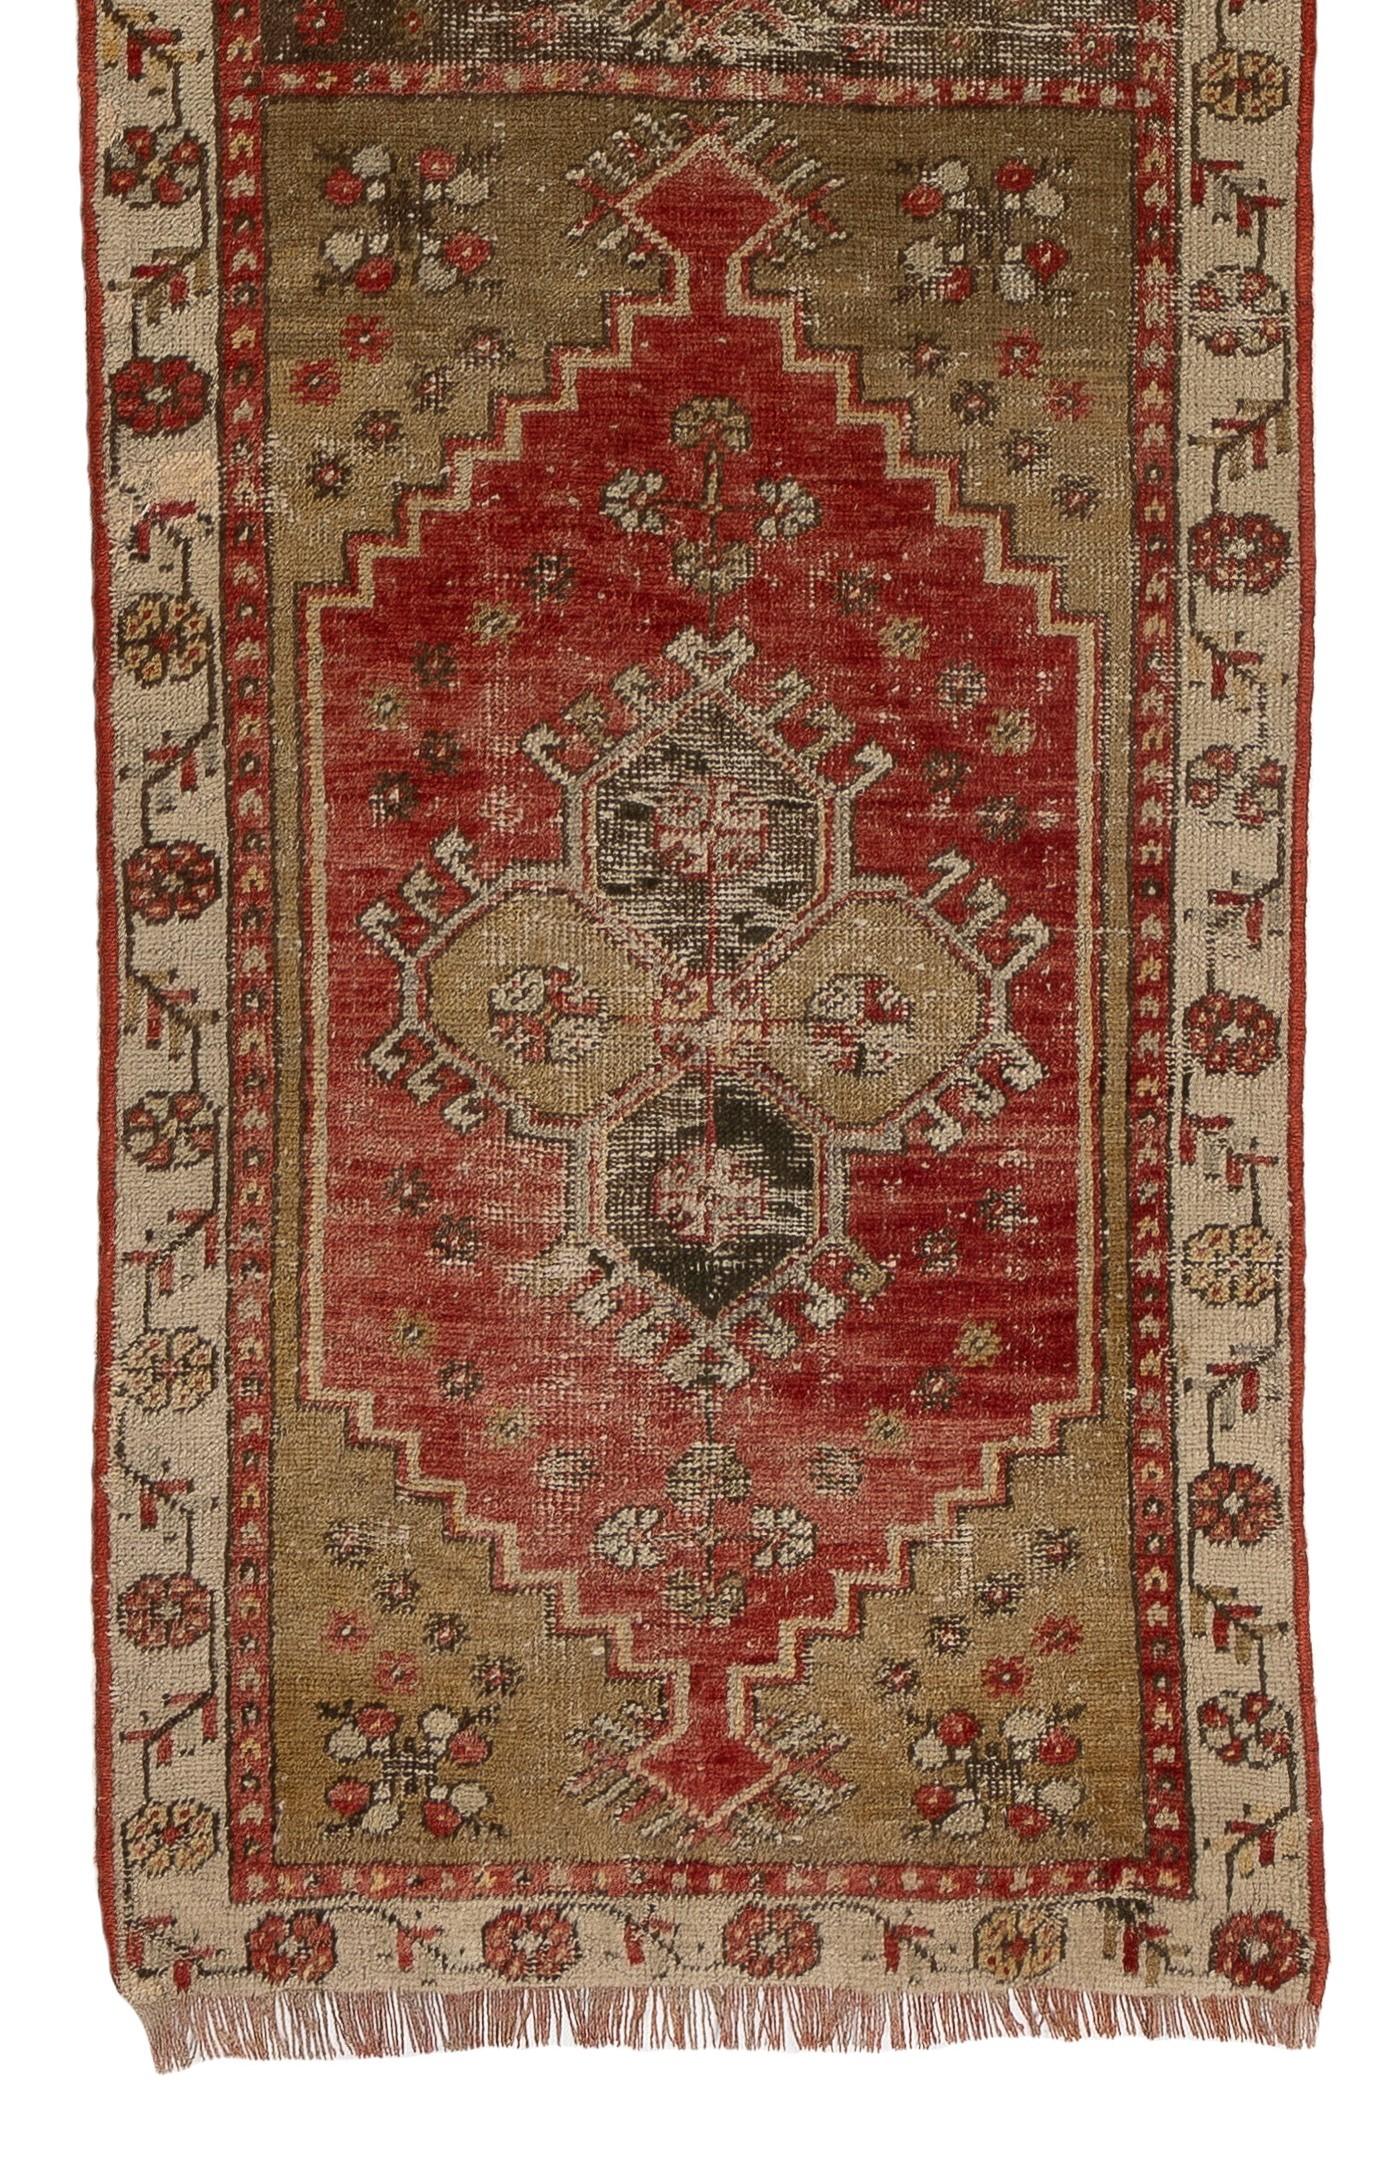 An early 20th century hand knotted runner from Central Anatolia with pleasing natural colors and wool pile on wool foundation. Good condition, minor wear in line with age, sturdy and as clean as a brand new rug.